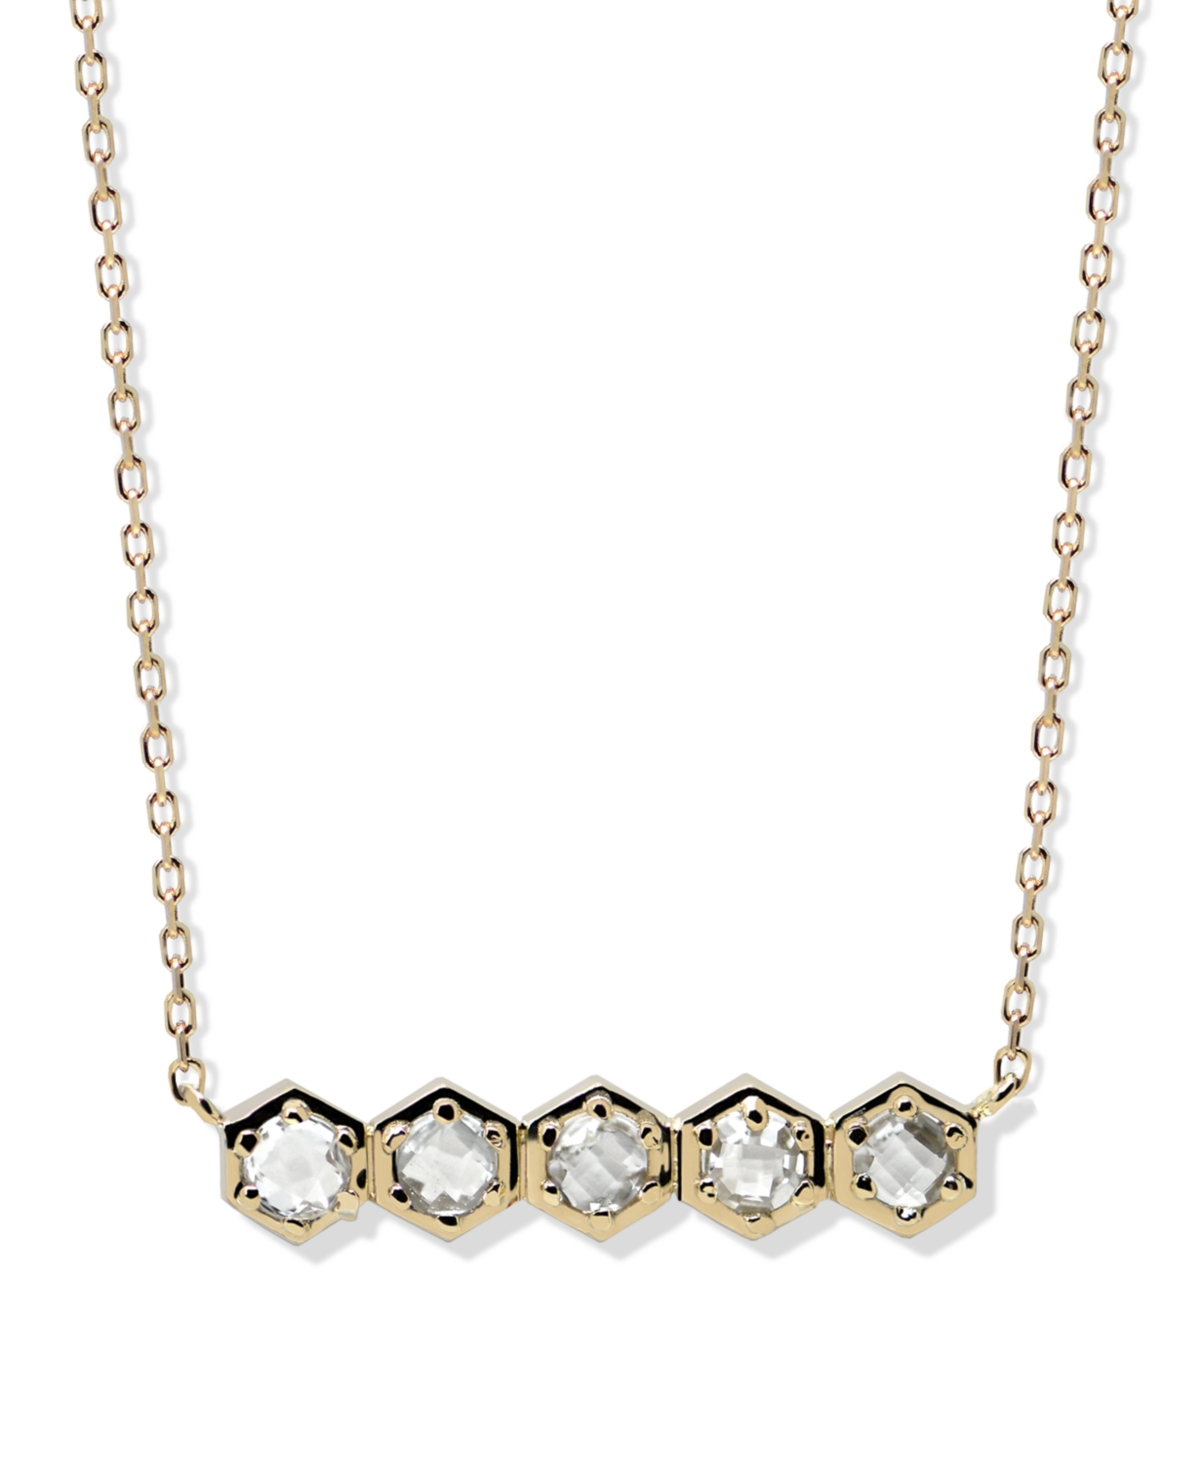 White Topaz (5/8 ct. t.w.) Bolt Mini Bar Necklace in 14k Yellow Gold - Clear